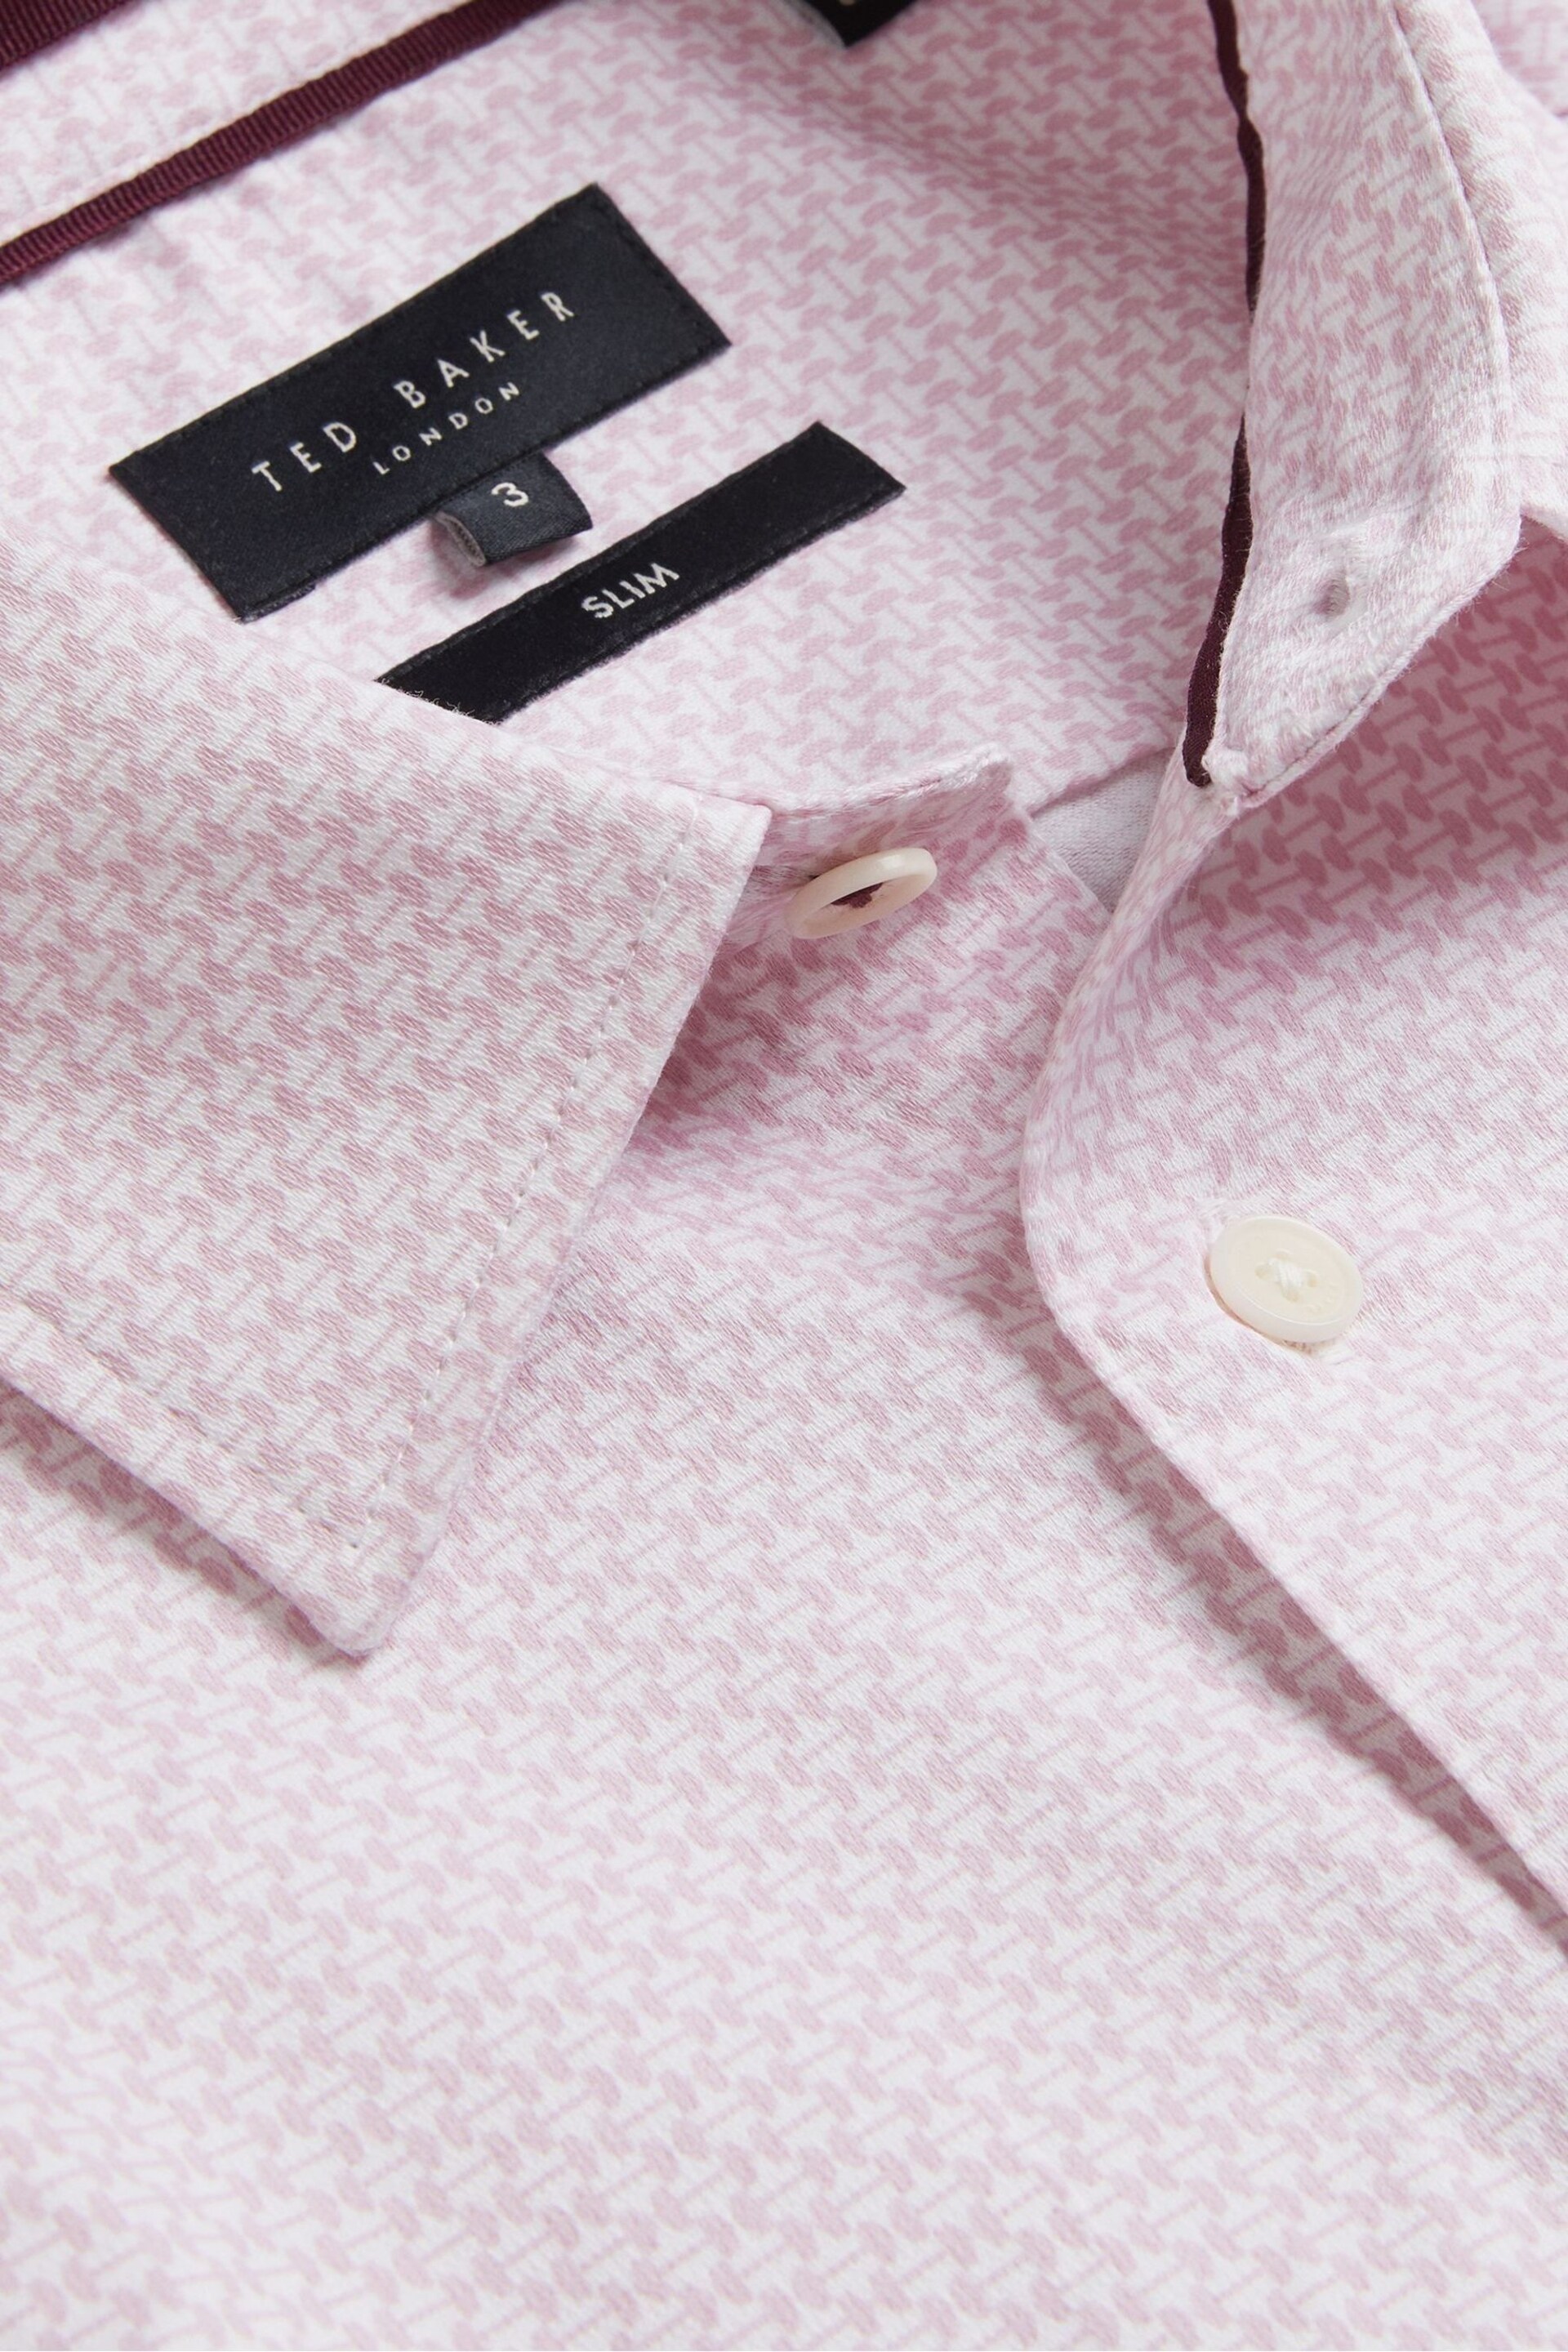 Ted Baker Pink Faenza Geo Shirt - Image 6 of 6